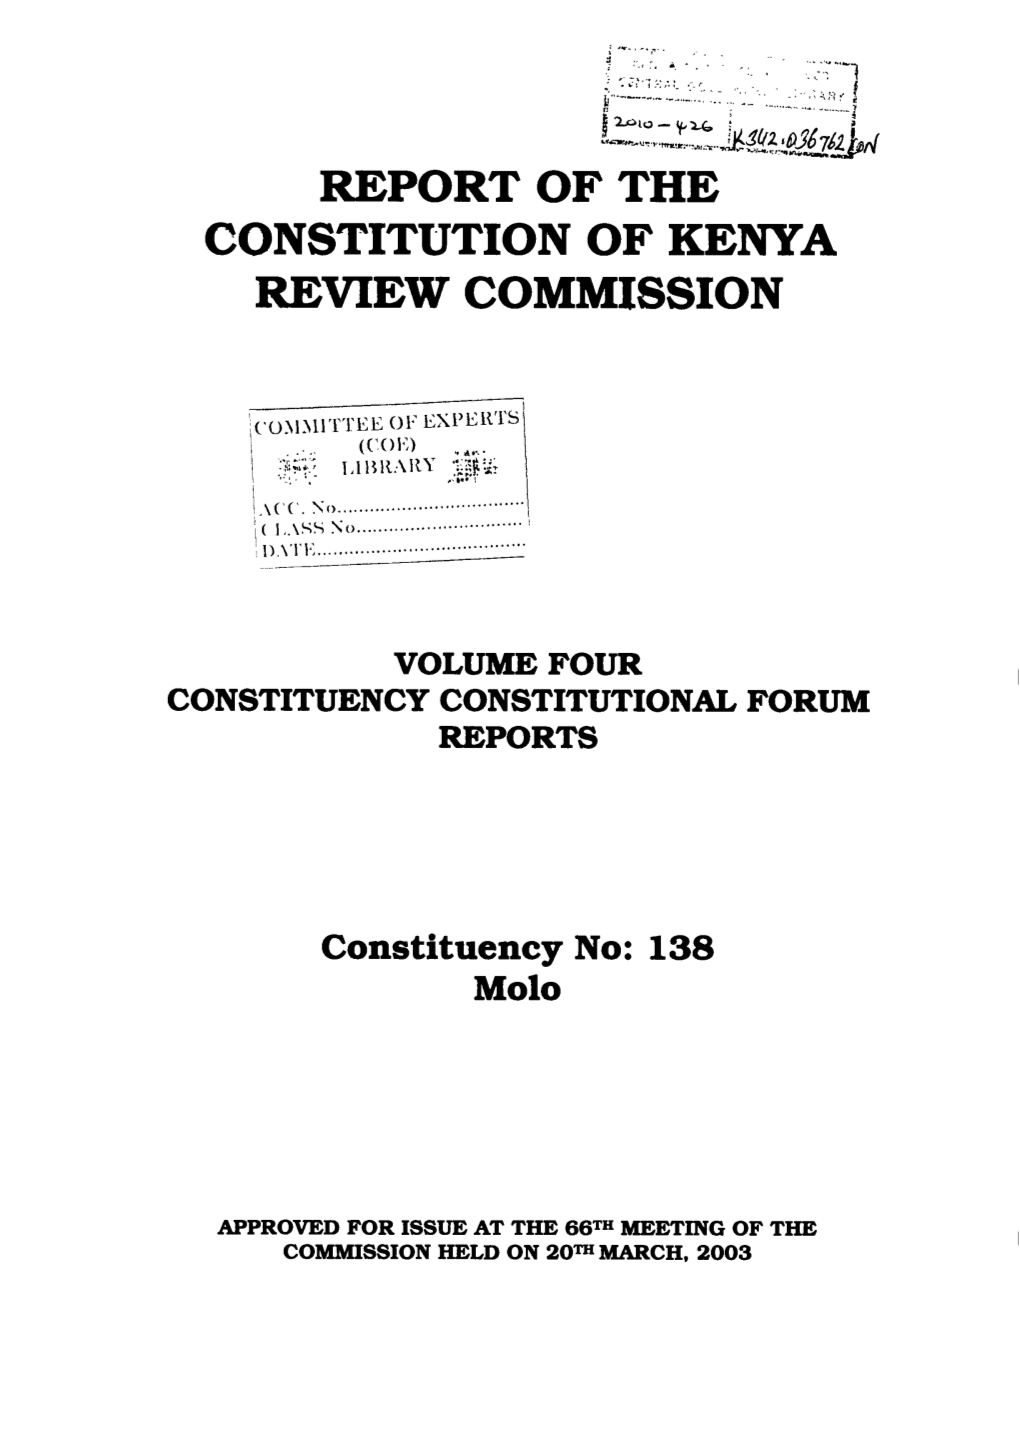 Report of the Constitution of Kenya Revieut Commission